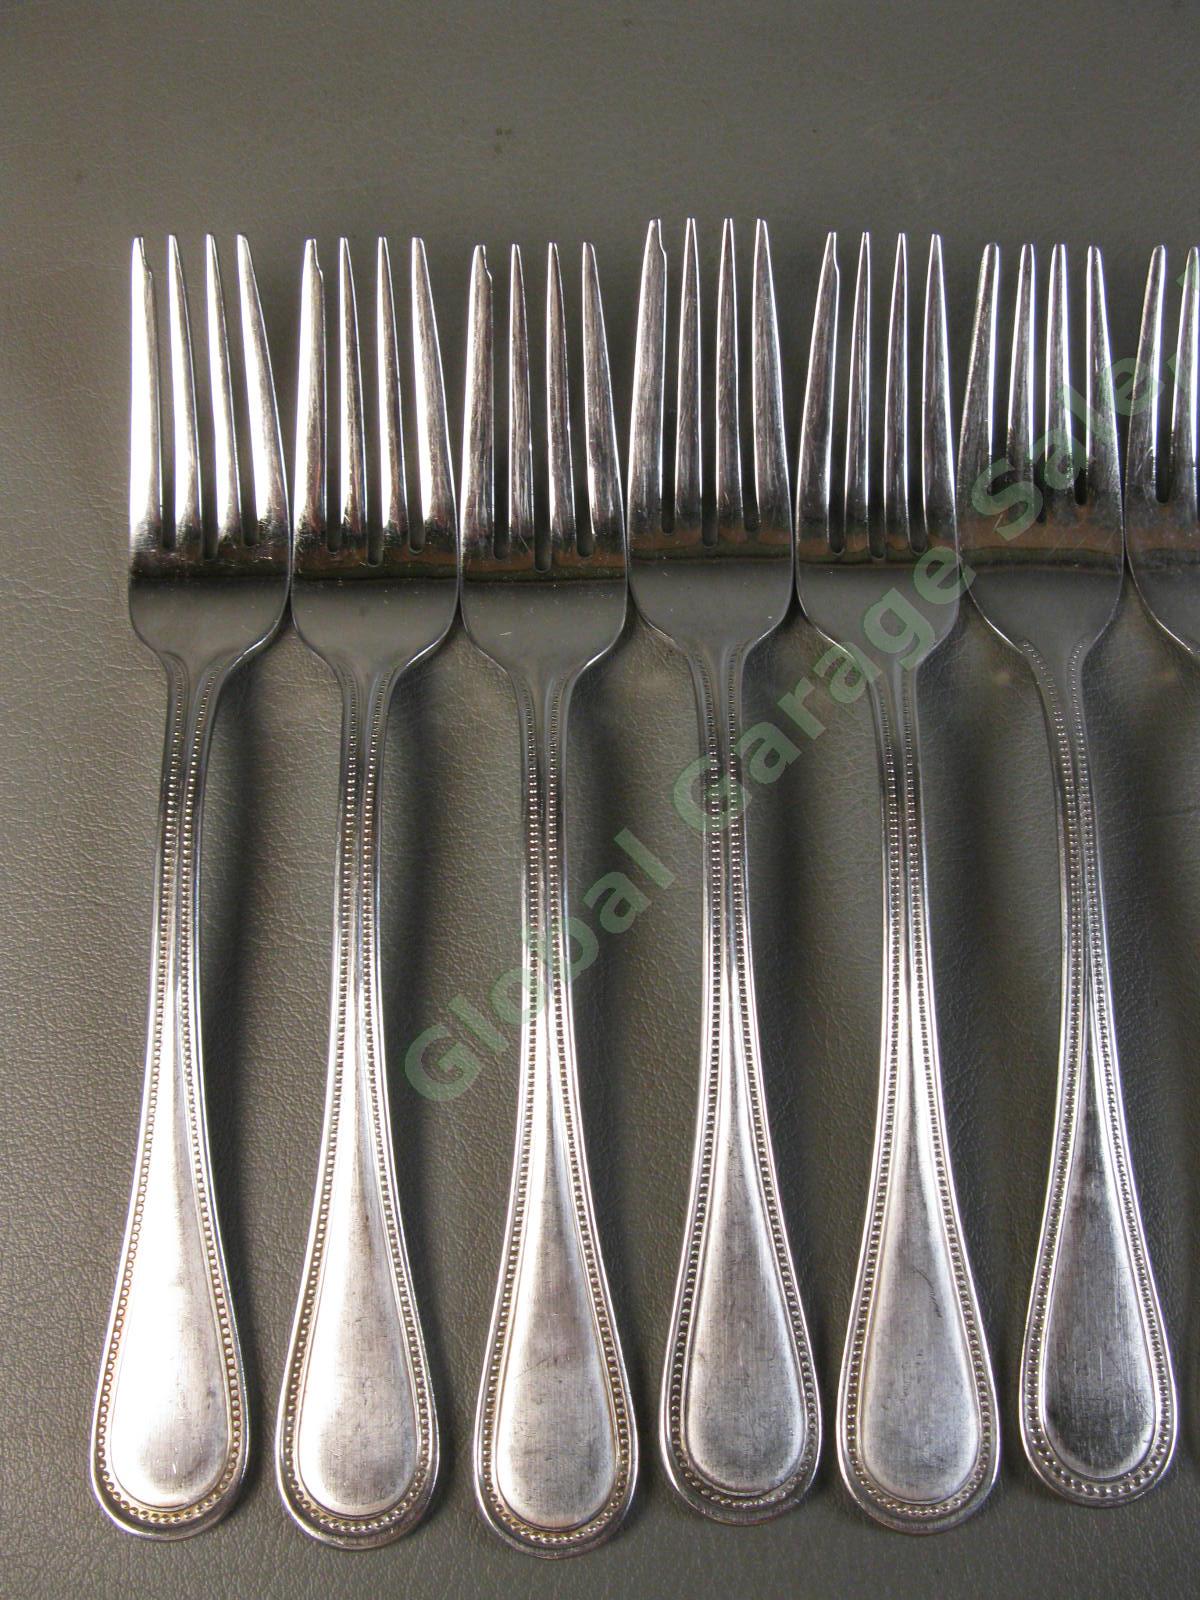 12 Towle Silver Beaded Antique Satin 7 1/4" Stainless Steel Salad Fork Set NR 1